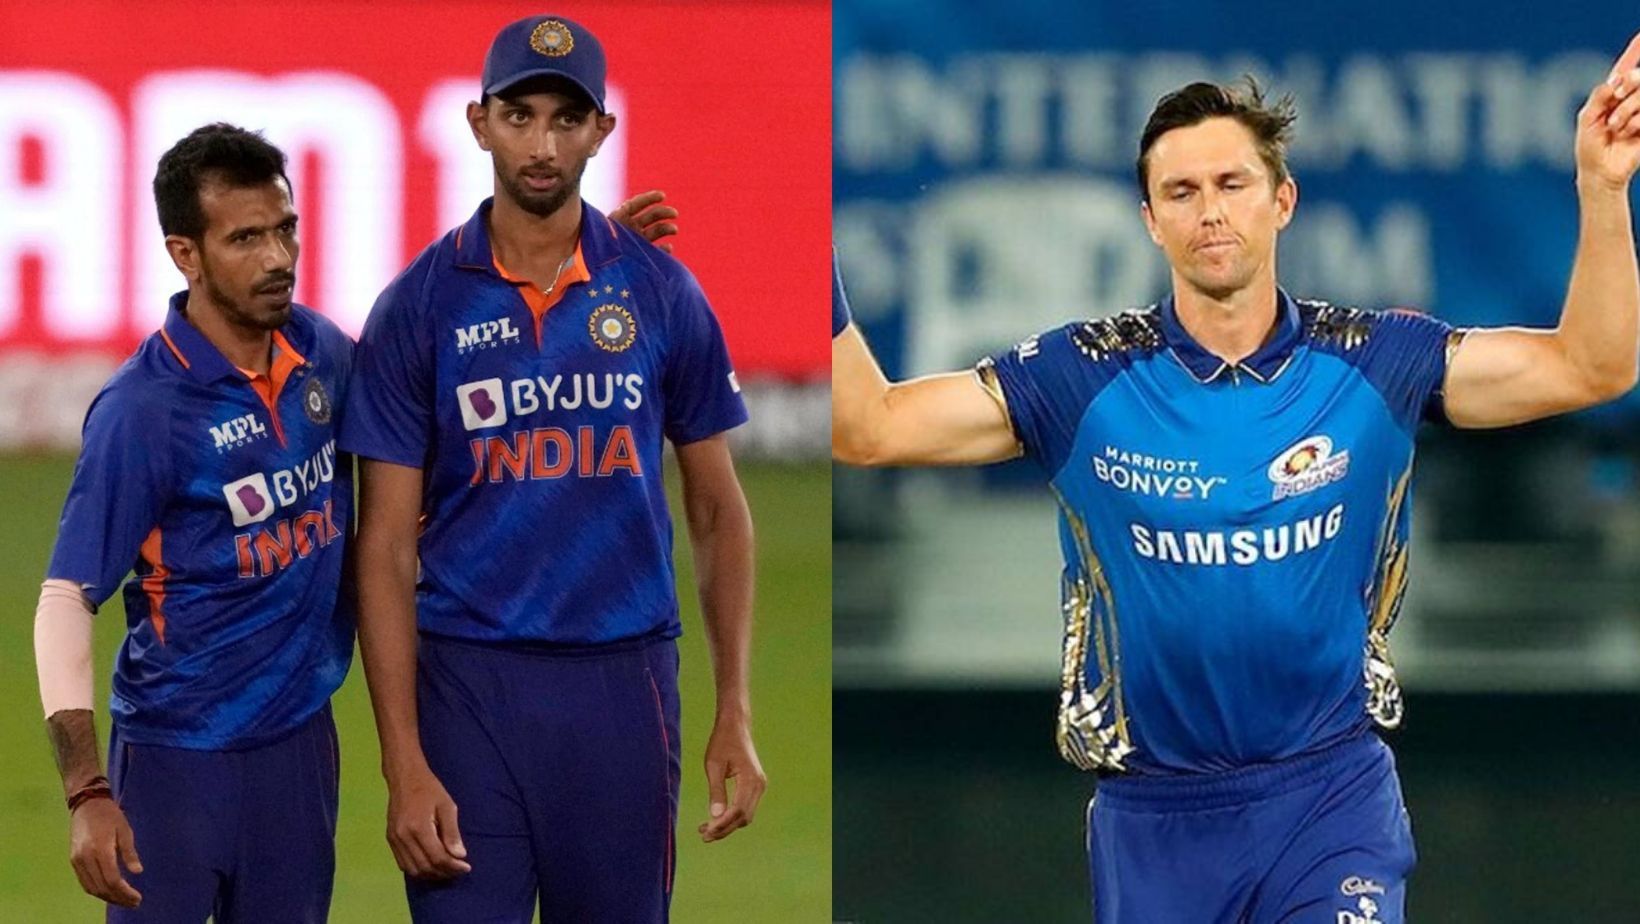 What was your favorite Rajasthan Royals signing on Day 1 of IPL 2022 auction?